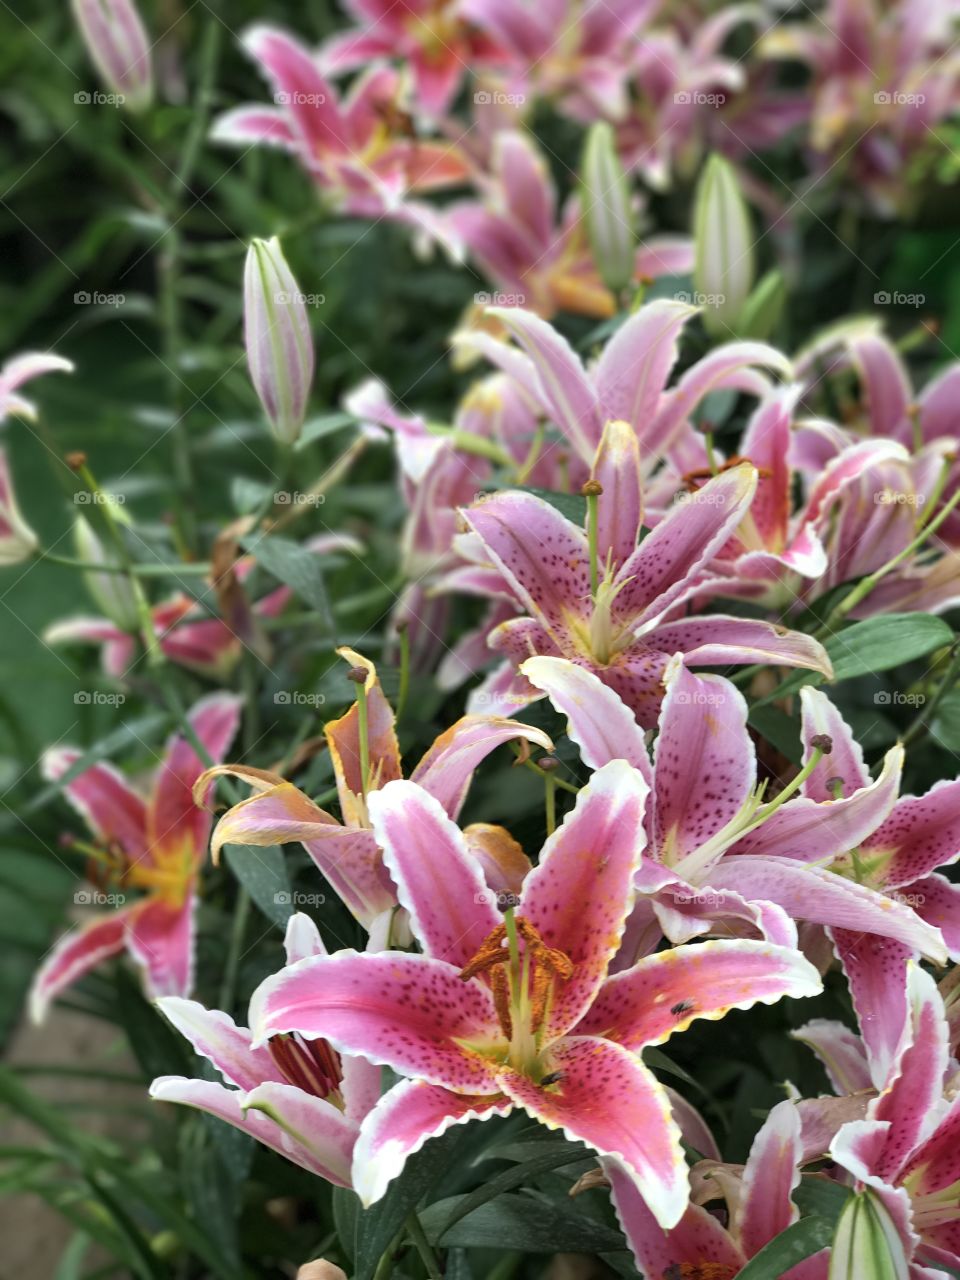 Pink lily or Lilium flowers in garden